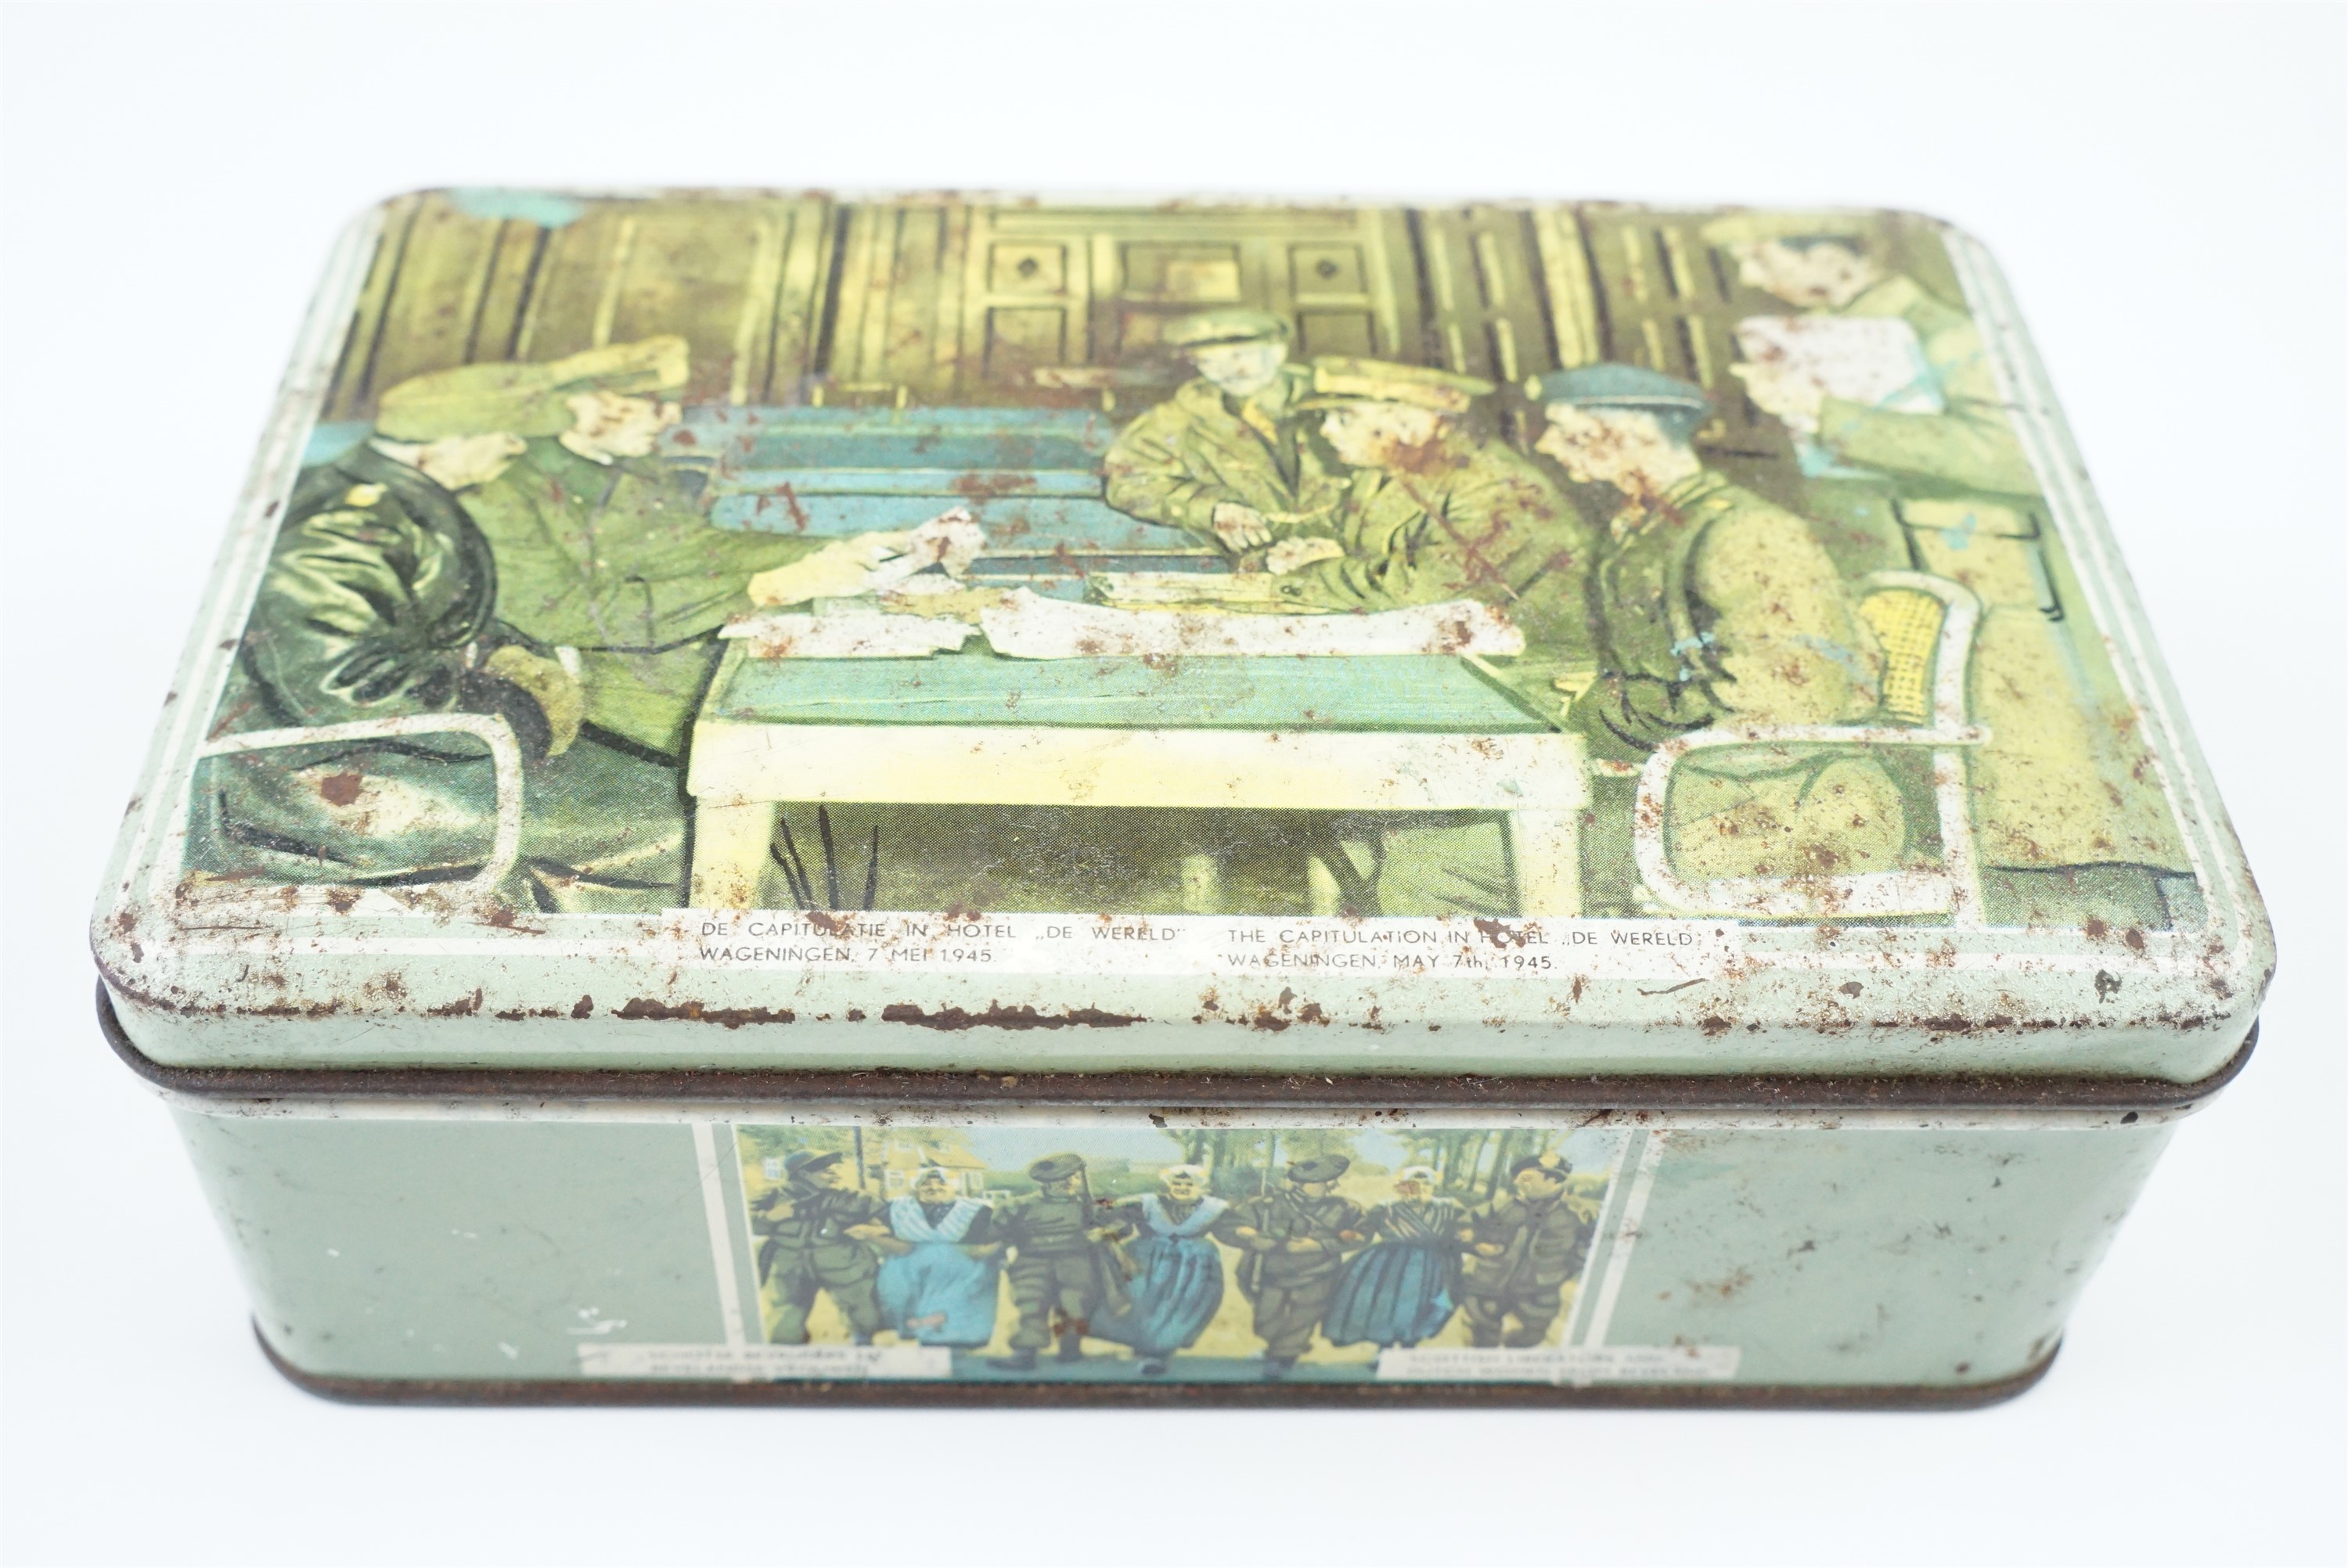 A 1940s Dutch printed tinplate box commemorating the surrender of German forces at Wageningen, May